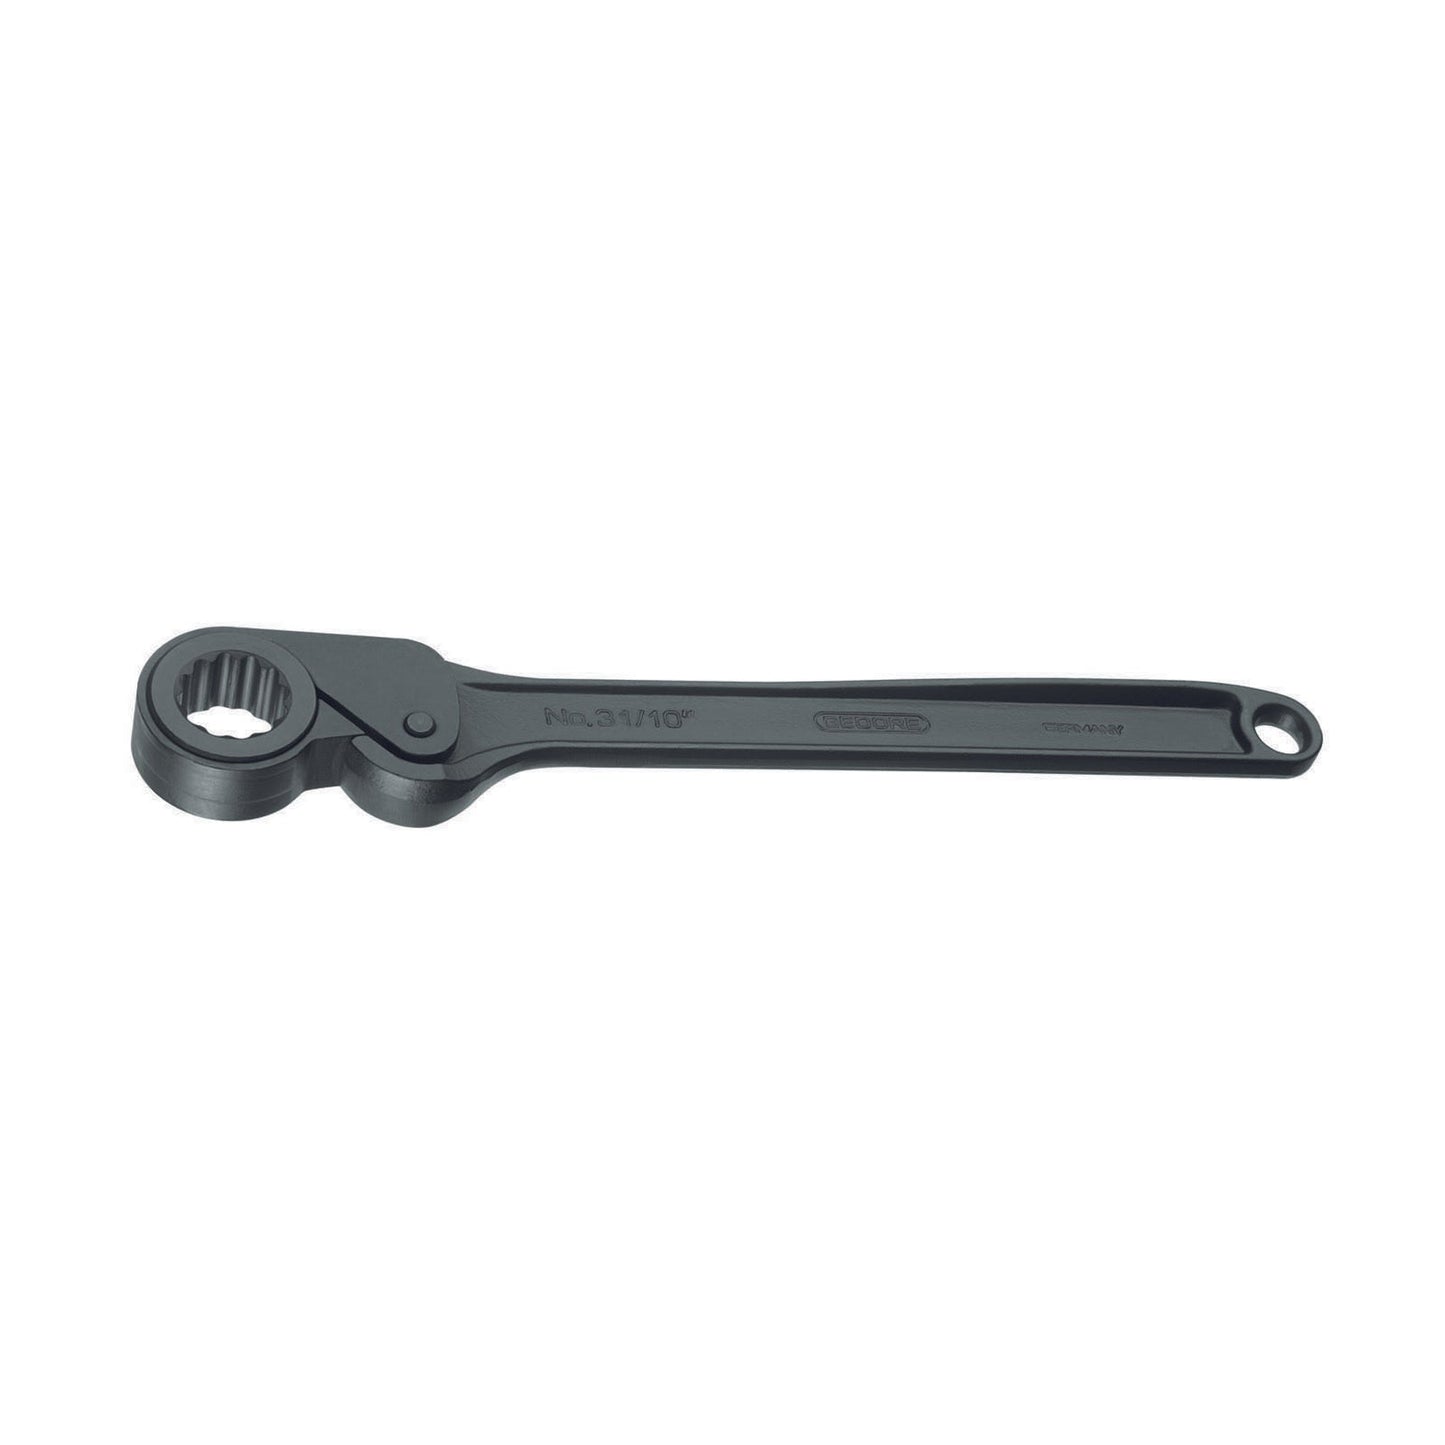 GEDORE 31 KR 35-70 - 35" ratchet with ring for 70 mm hexagon (6257280)